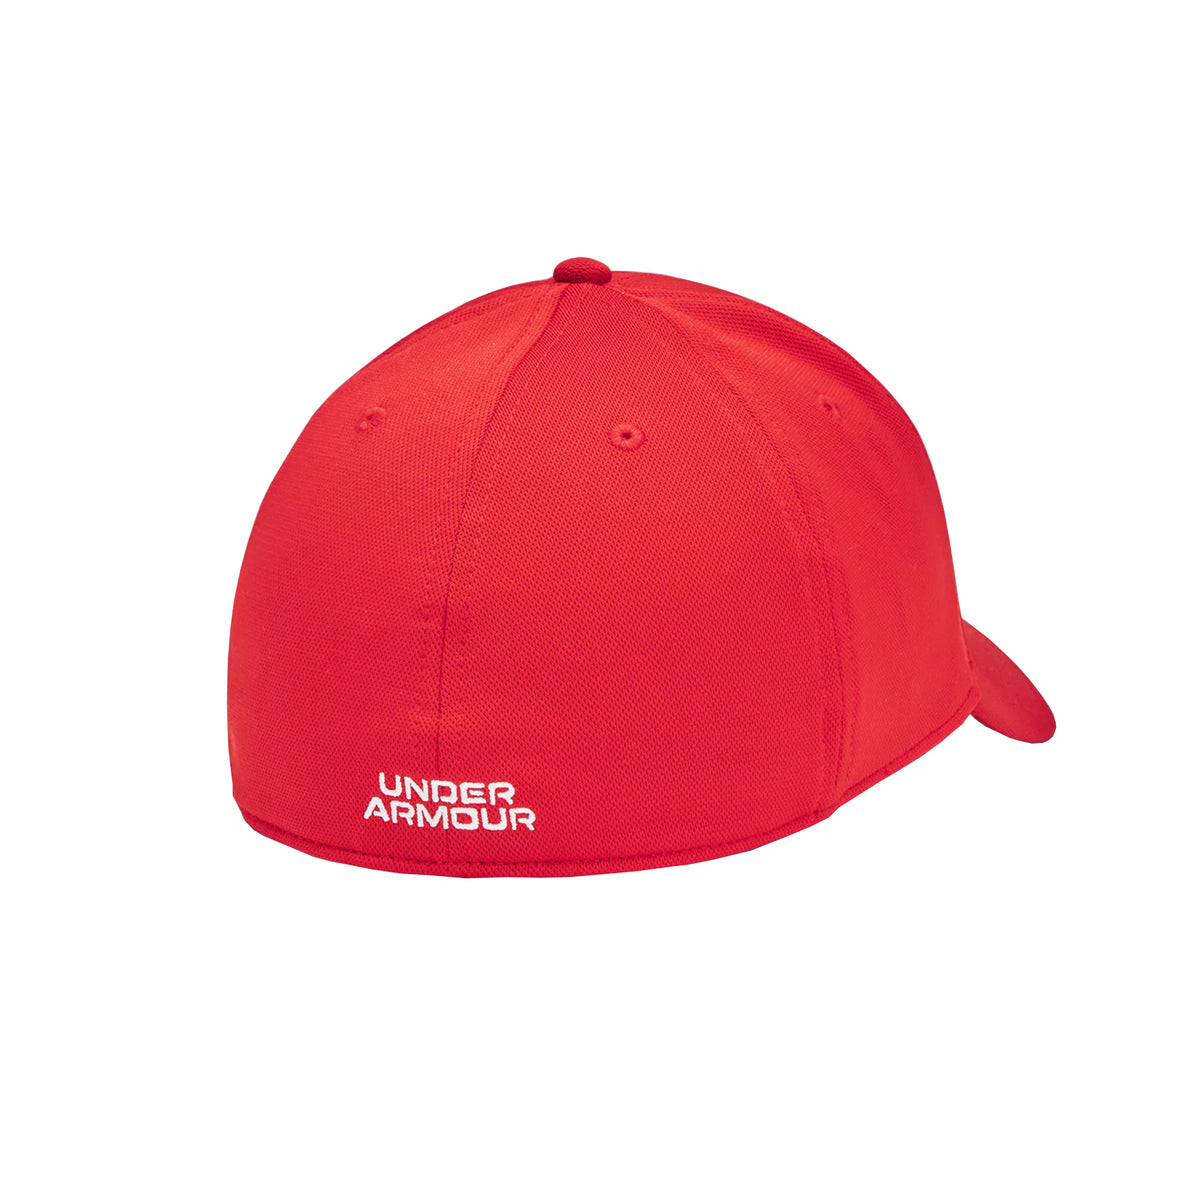 Under Armour Blitzing Baseball Cap: Red/White